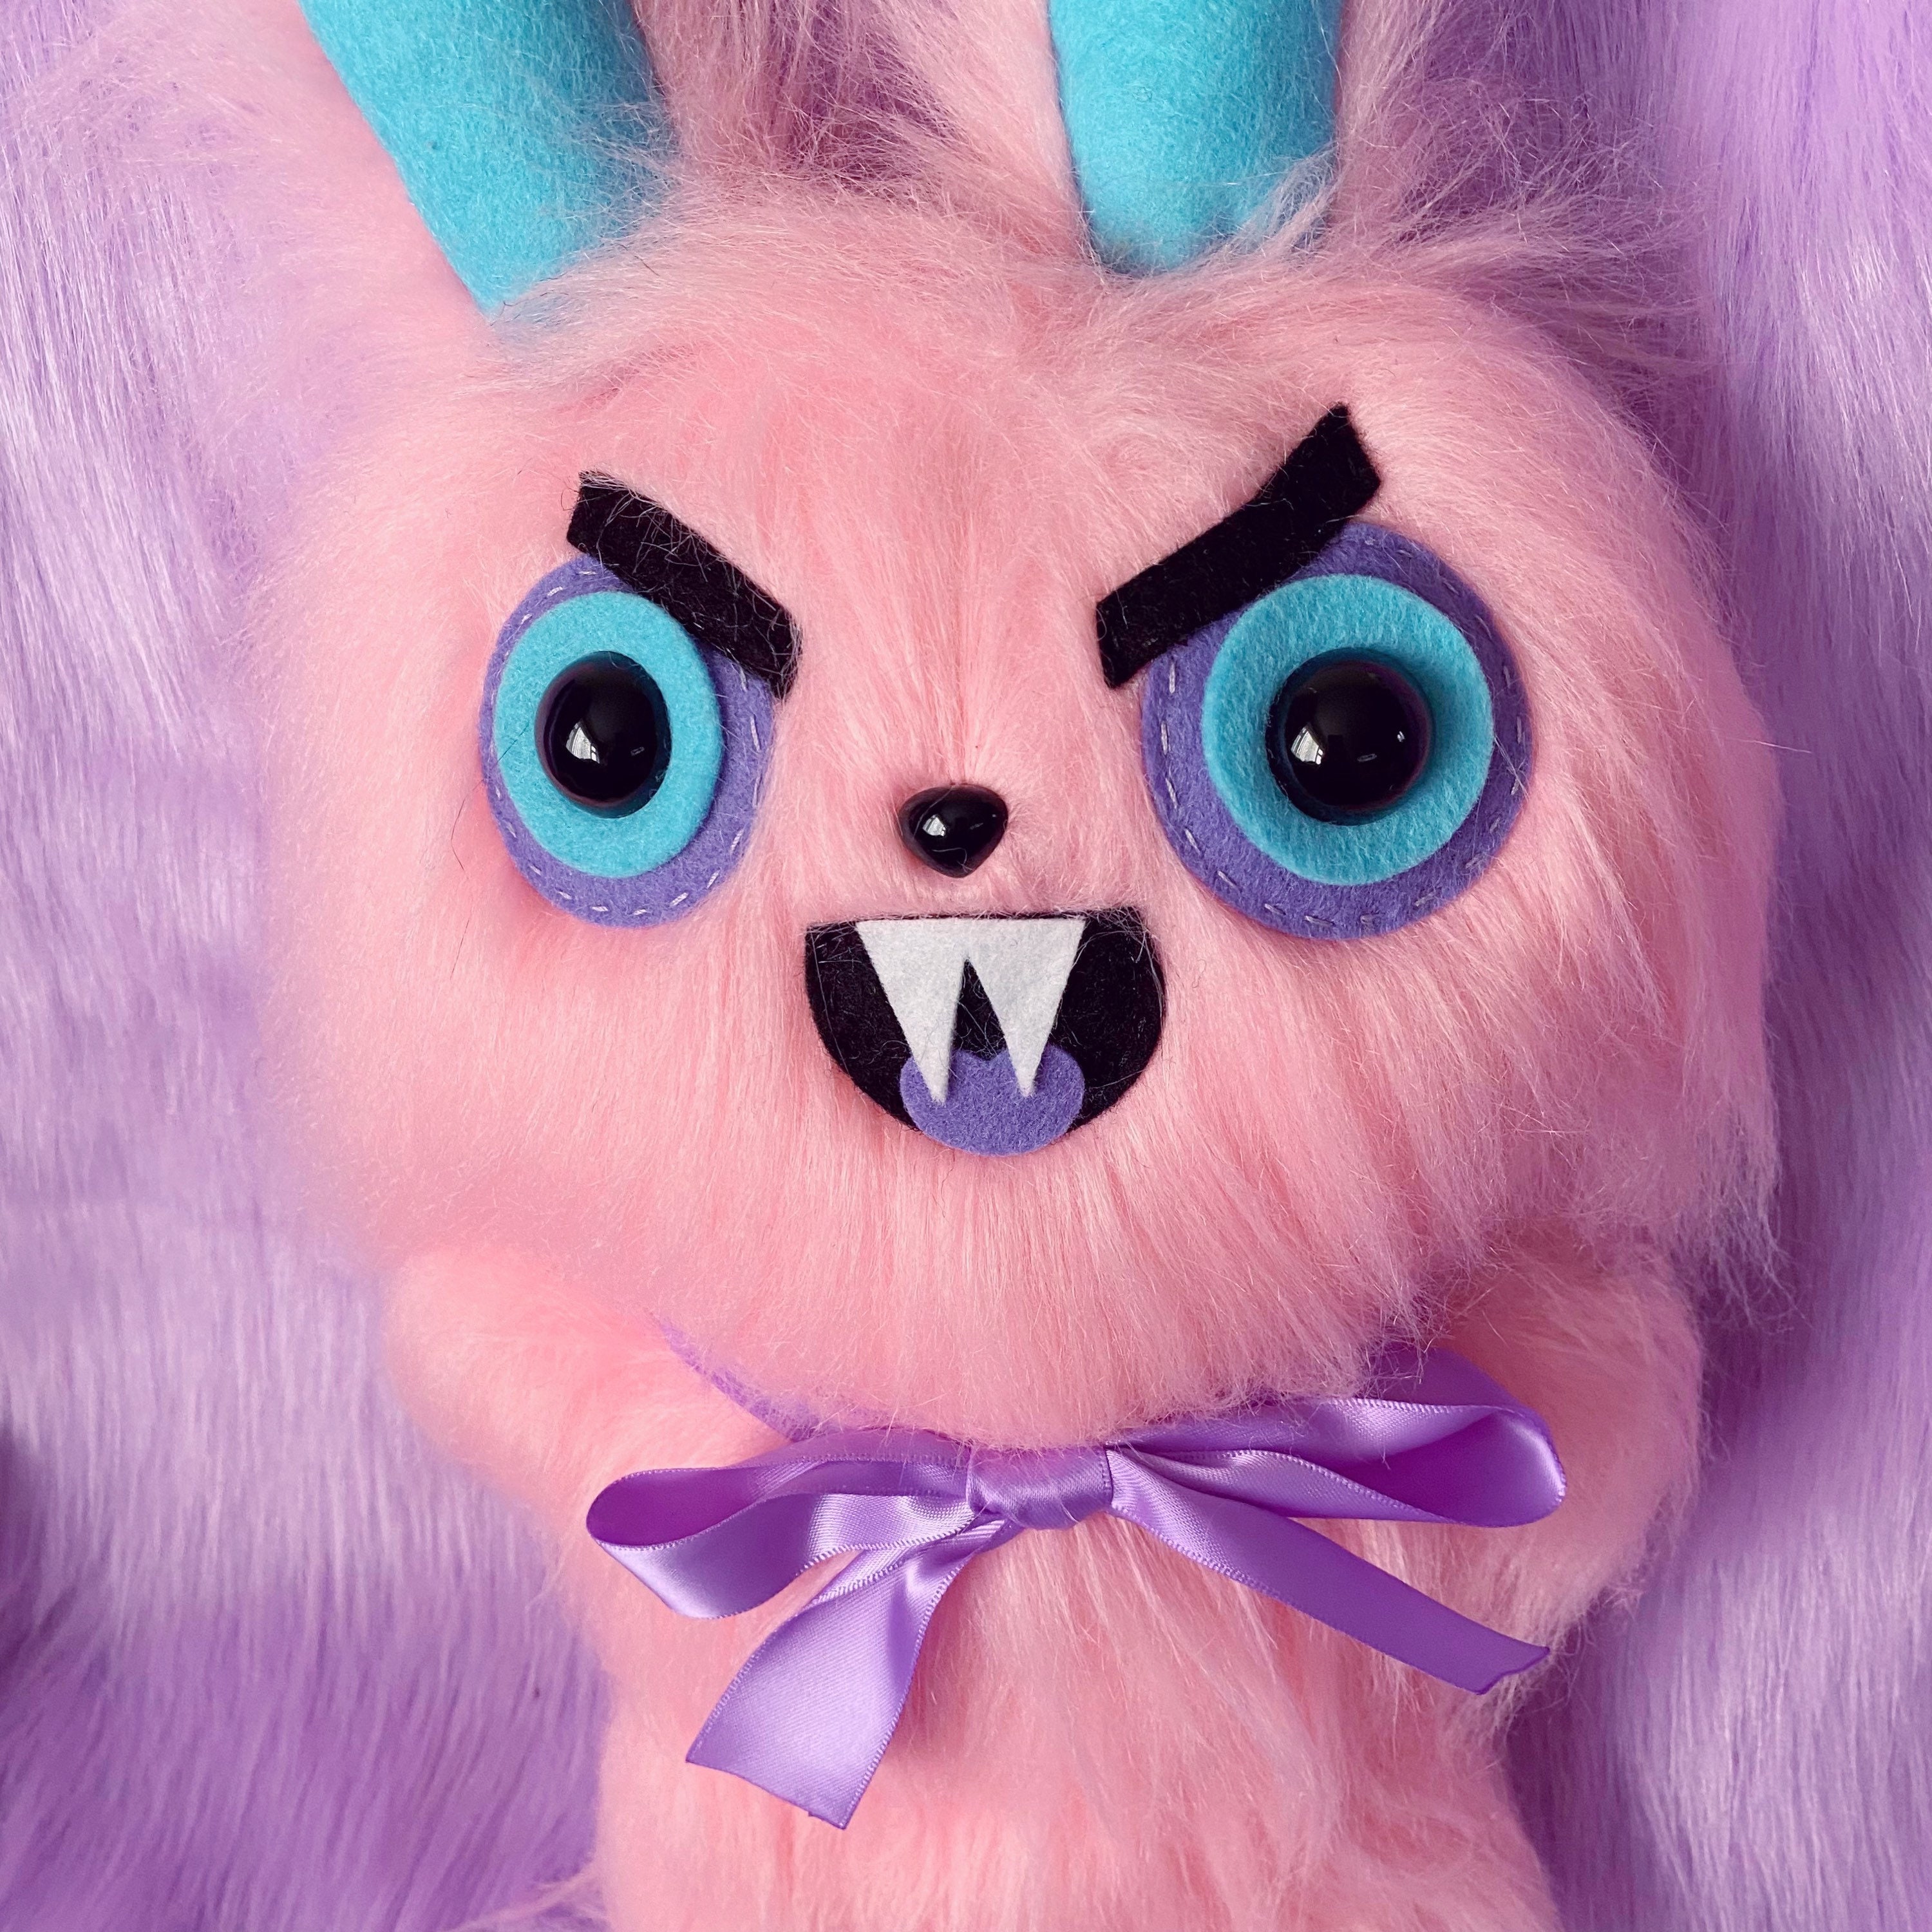  HNZQE Creepy Gothic 11.8 Pink Bunny Plush Doll Pillow Kawaii Stuffed  Animal Crazy Rabbit Plushie Toy Easter Halloween Birthday Gifts for Girl  Boy (11.8,Pink) : Toys & Games